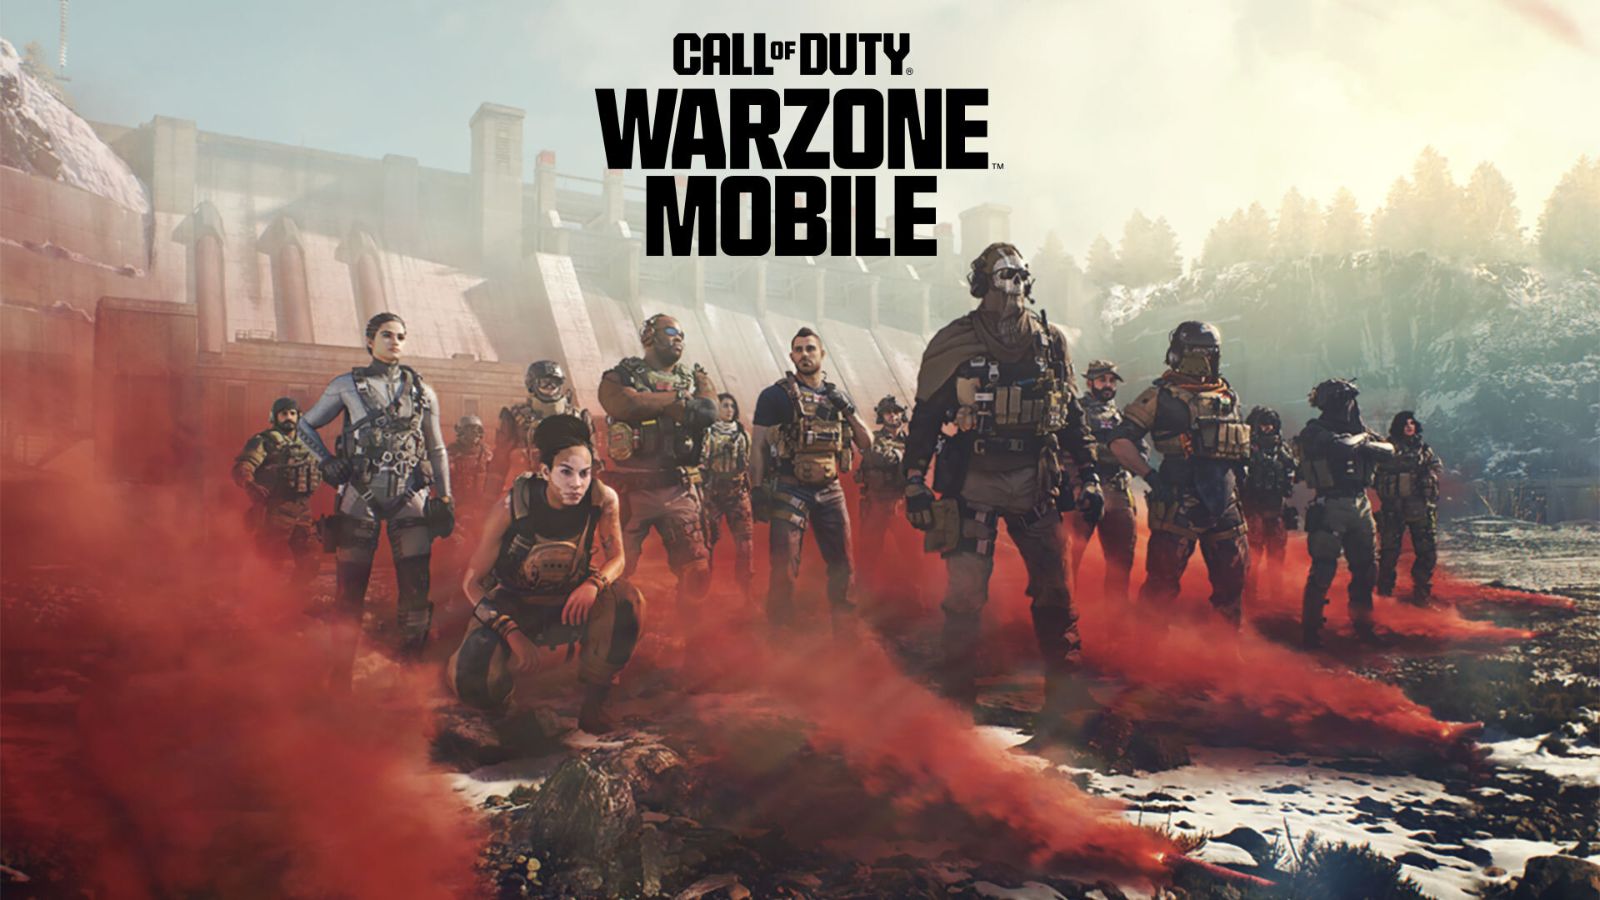 Warzone Mobile release date slated to